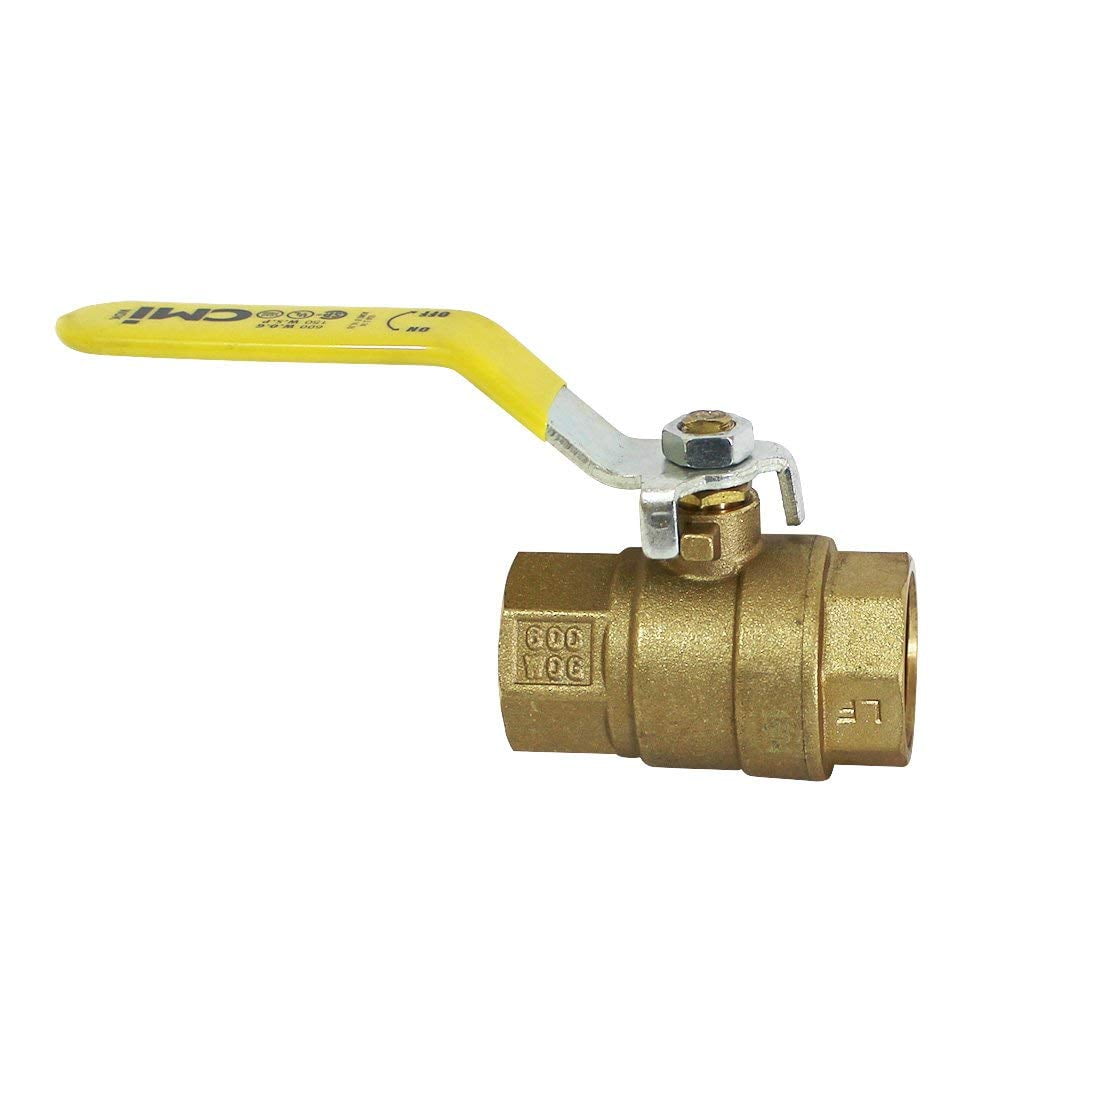 2" IPS Full Port Brass Ball Valve CSA Approved 600 WOG Lead Free Threaded 2PACK 